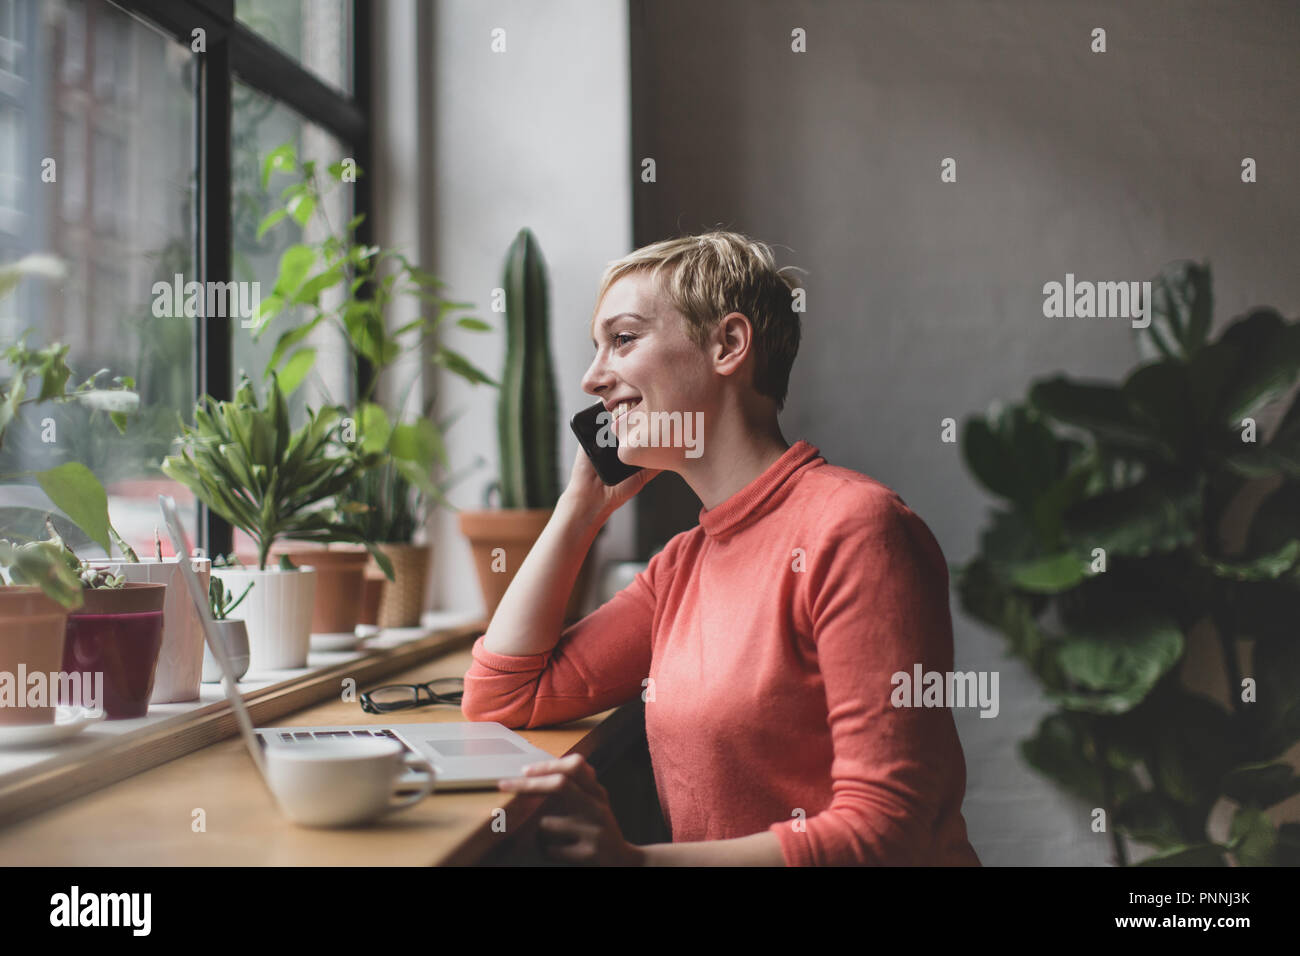 Freelance businesswoman working in a cafe Stock Photo